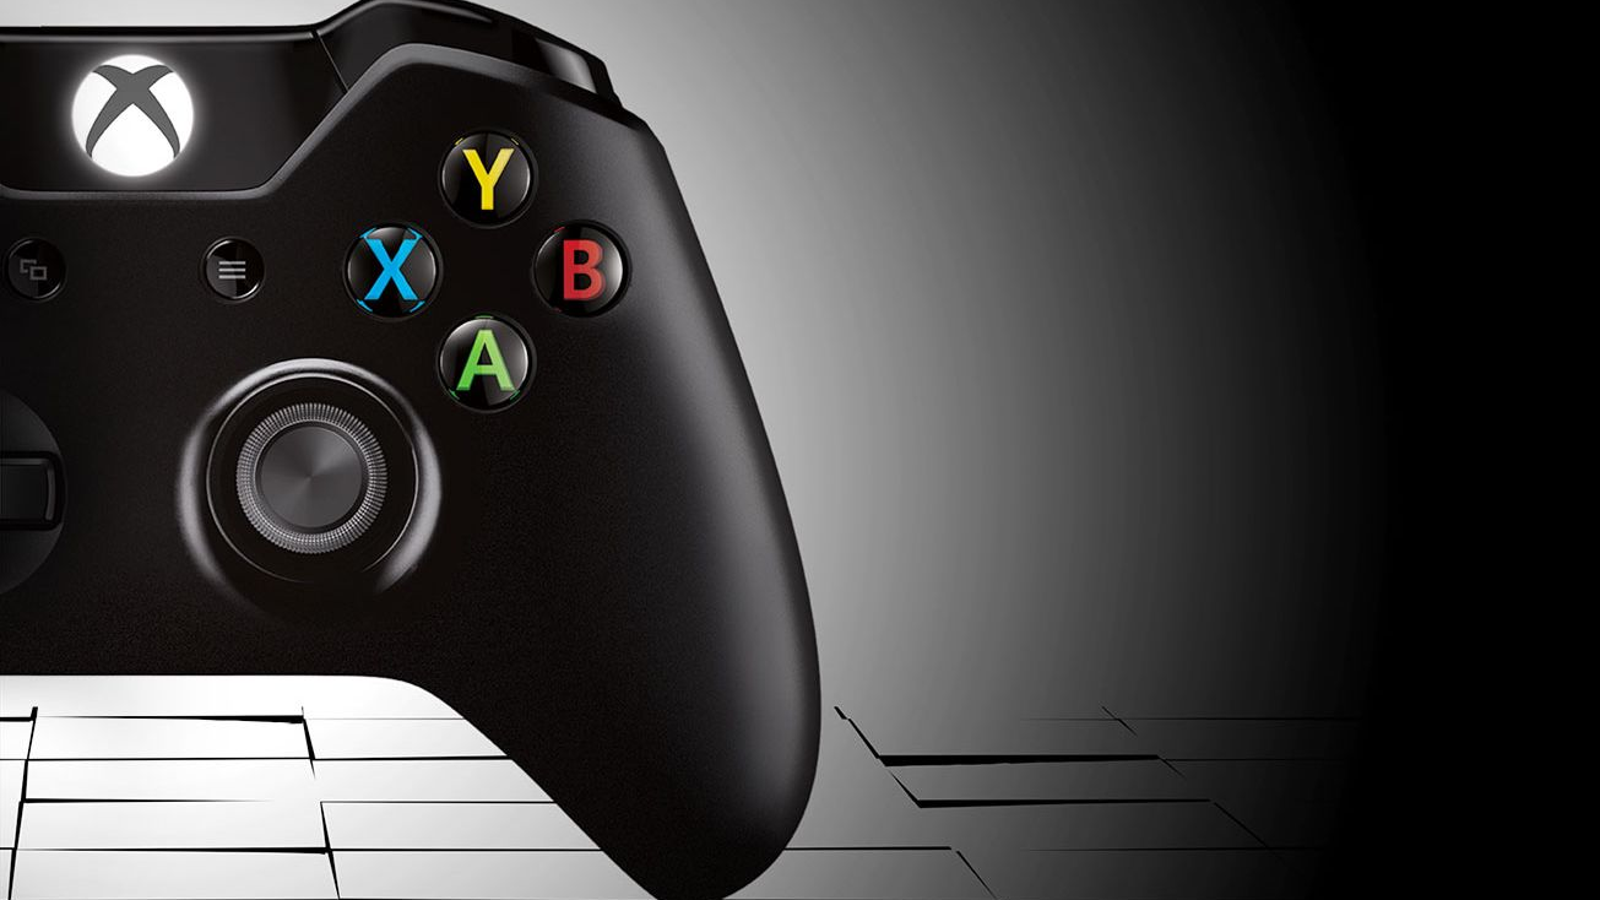 constante sopa huella Take a look at the new Xbox One interface, coming fall 2015 | VG247